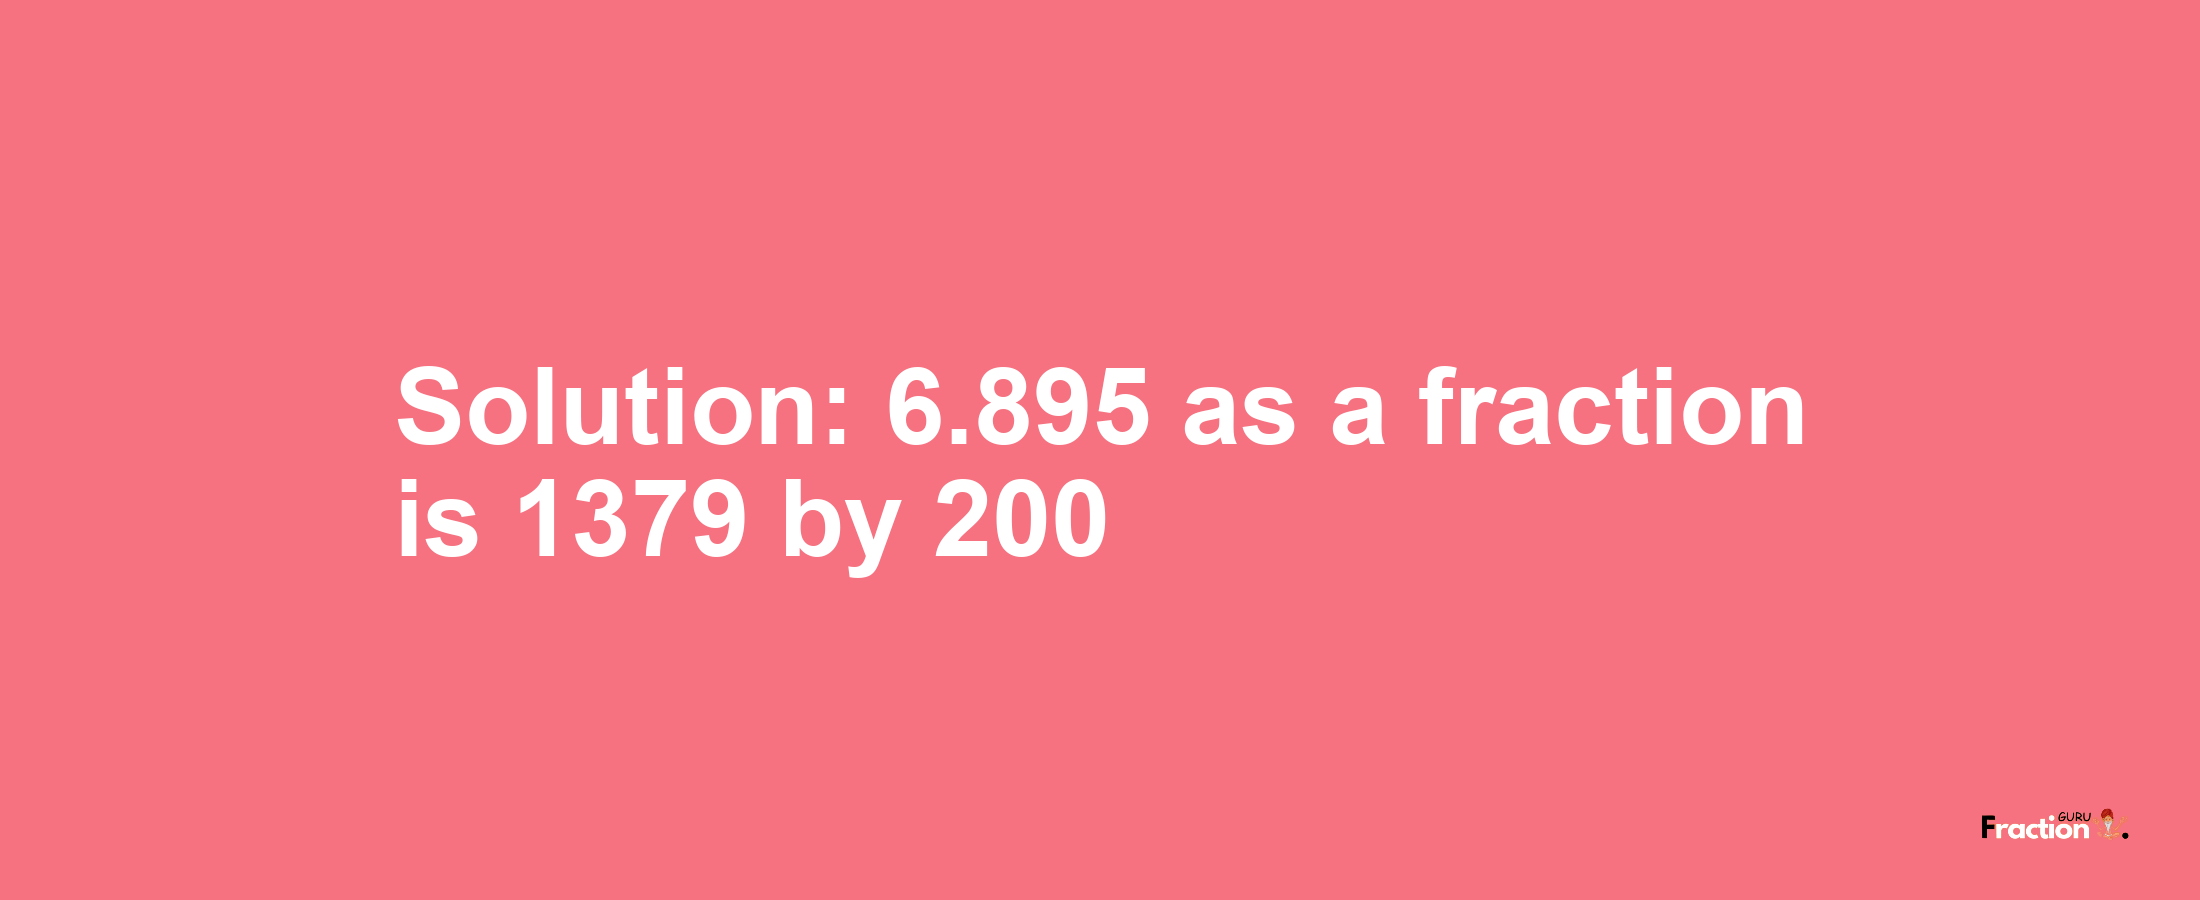 Solution:6.895 as a fraction is 1379/200